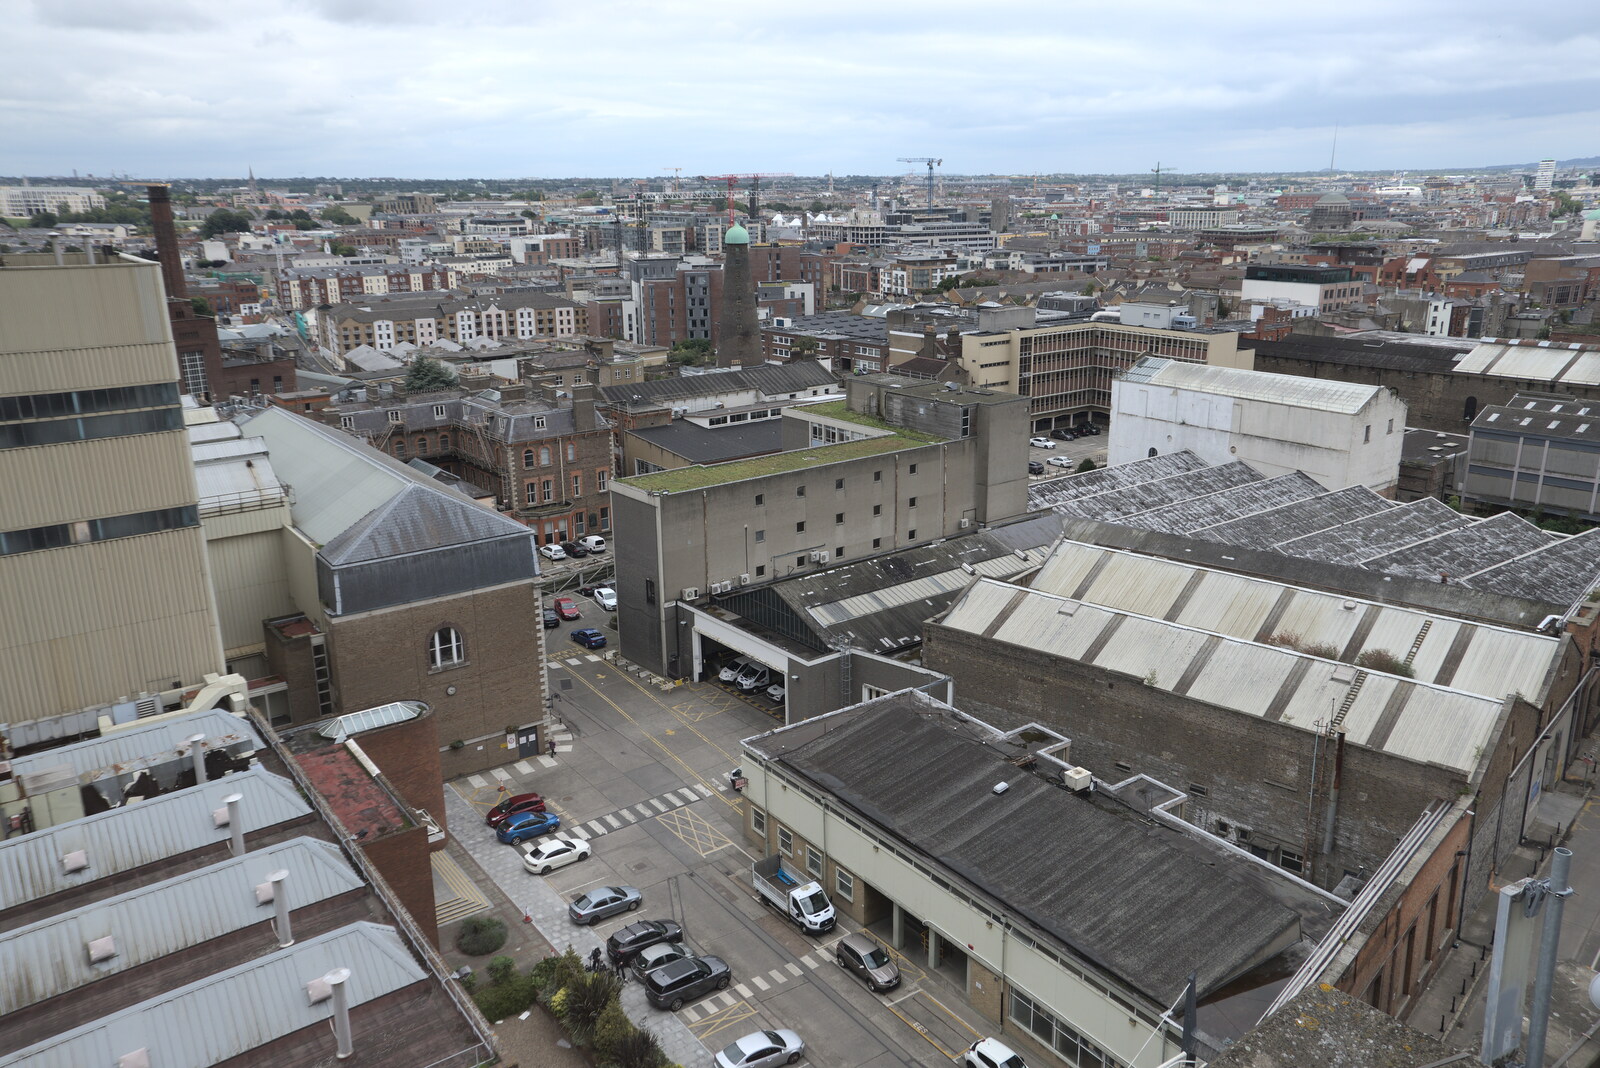 Looking over Dublin, with the spike on the horizon from The Guinness Storehouse Tour, St. James's Gate, Dublin, Ireland - 17th August 2021